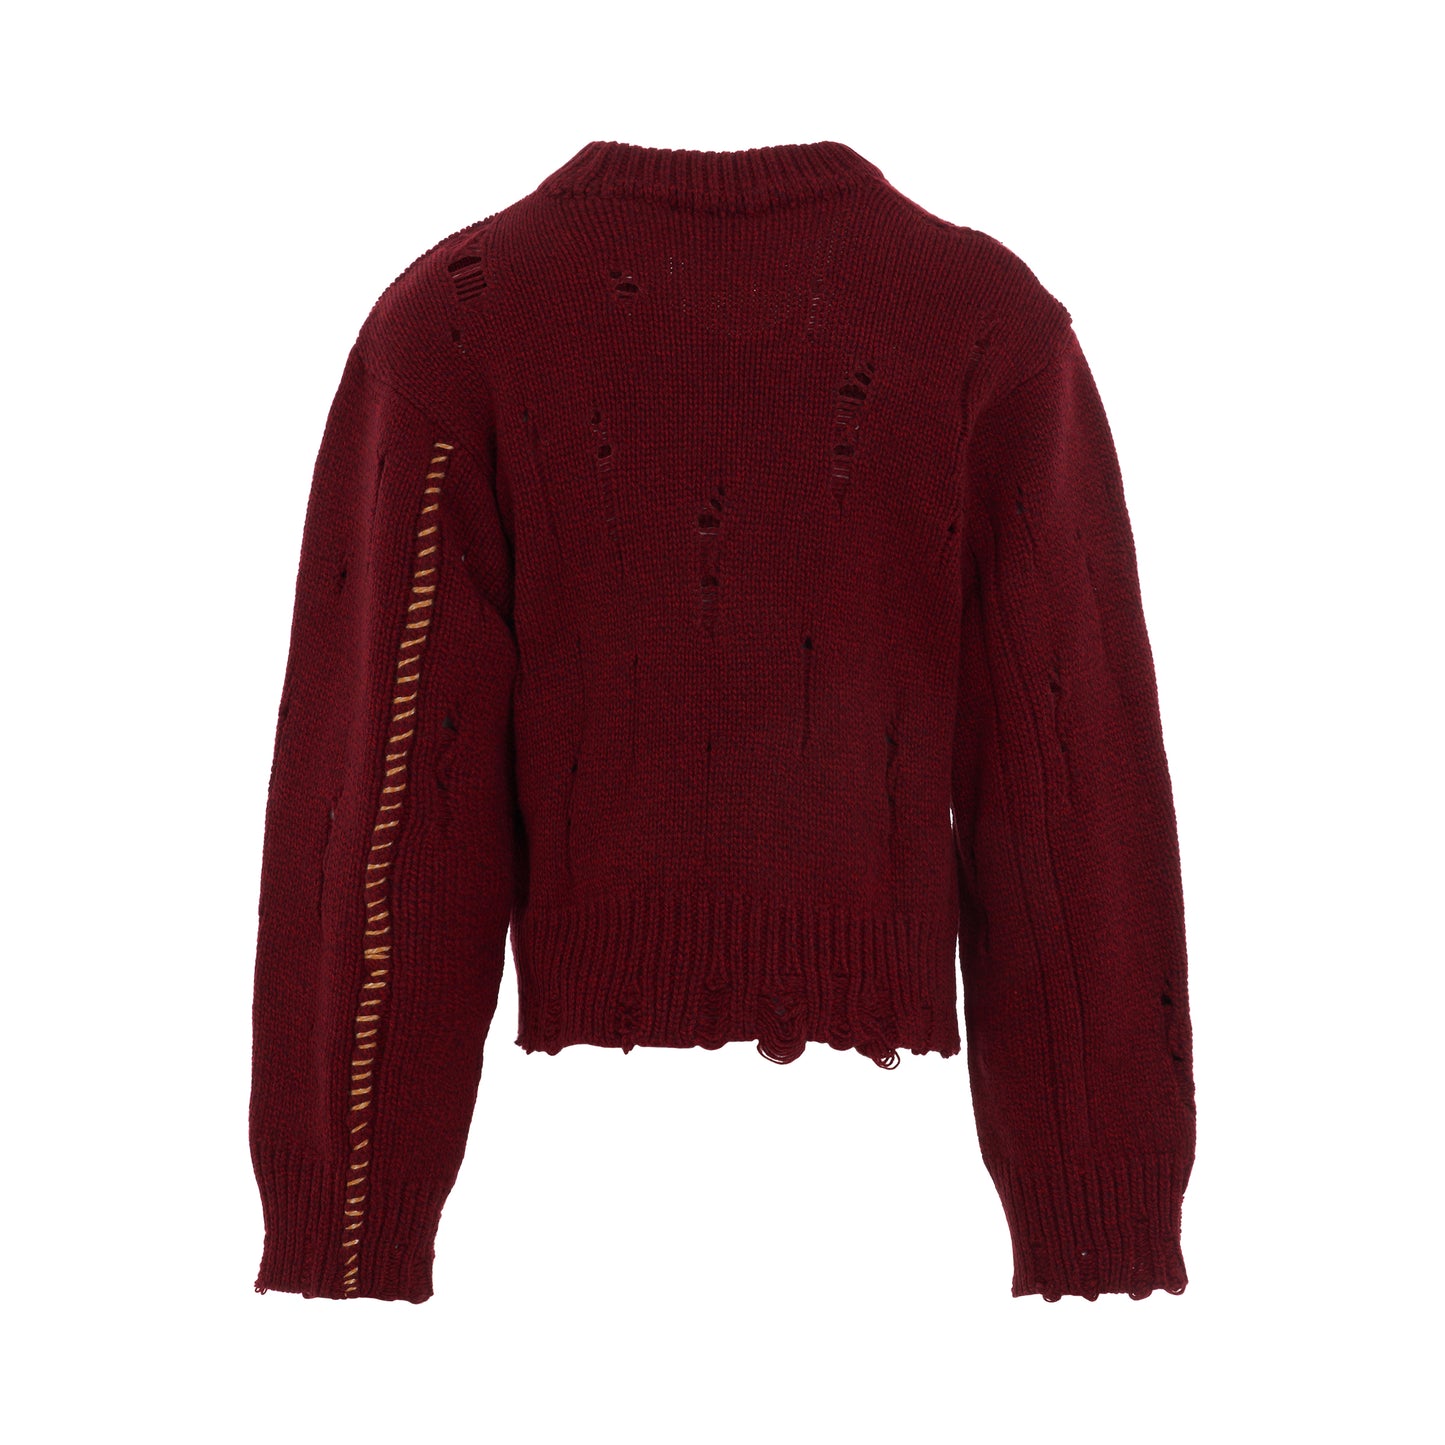 Eronlab Knit Sweater in Red